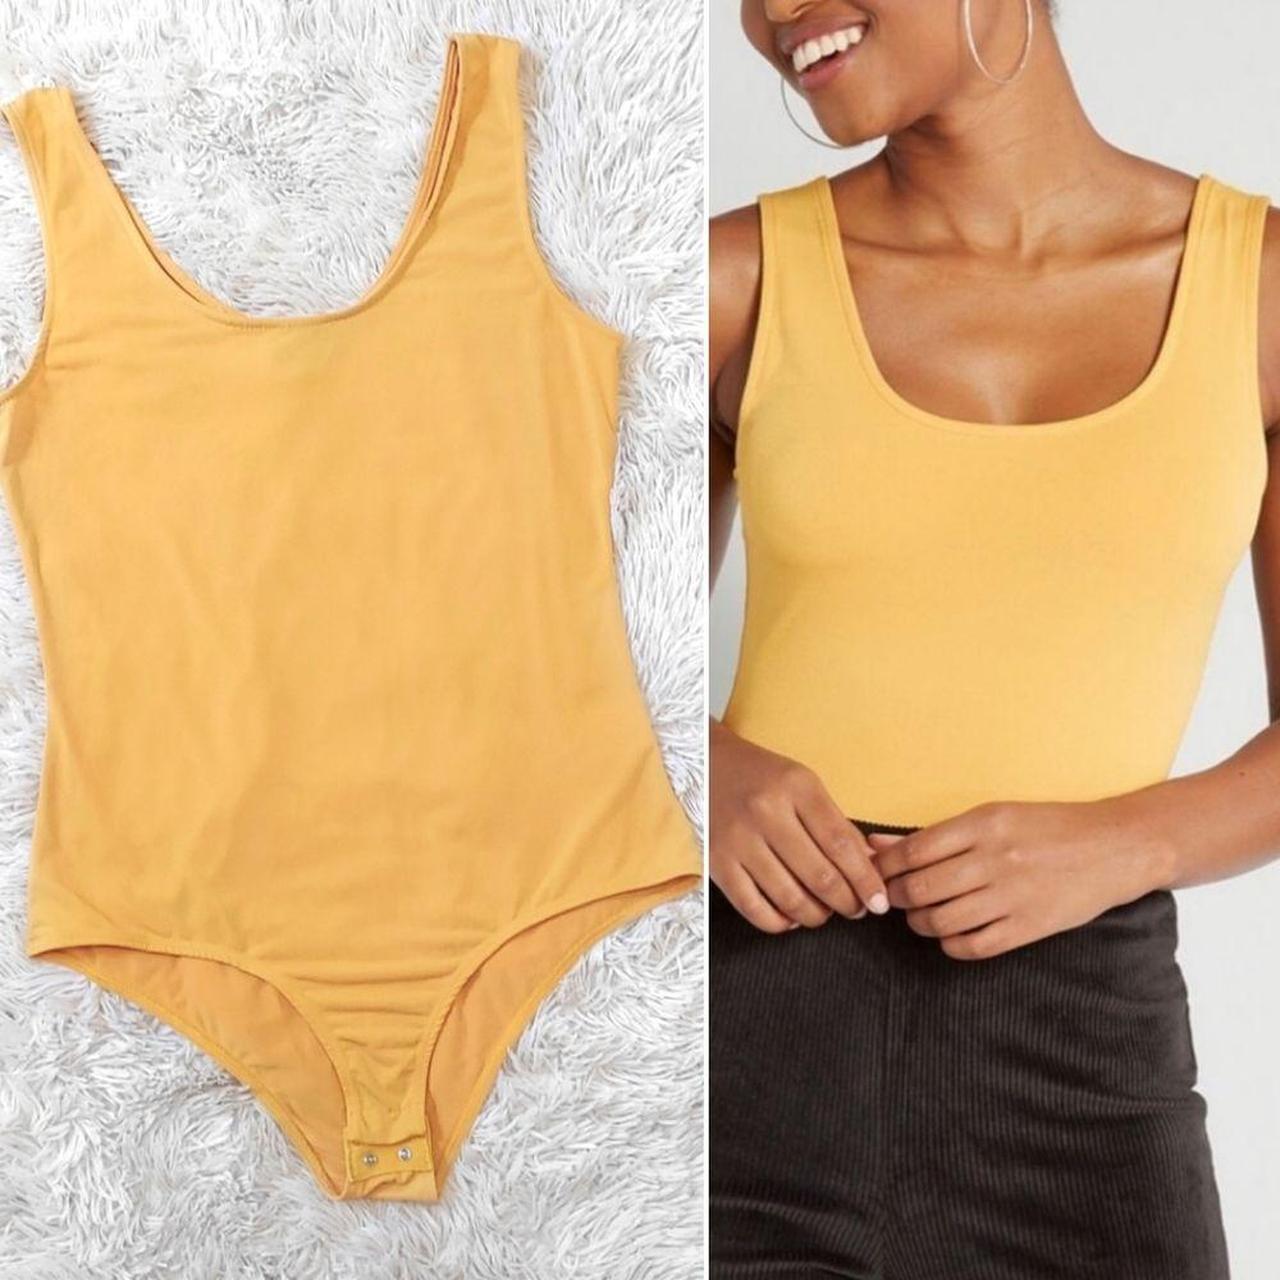 Product Image 1 - Modcloth bodysuit!

Mustard yellow.

Scoop neck front